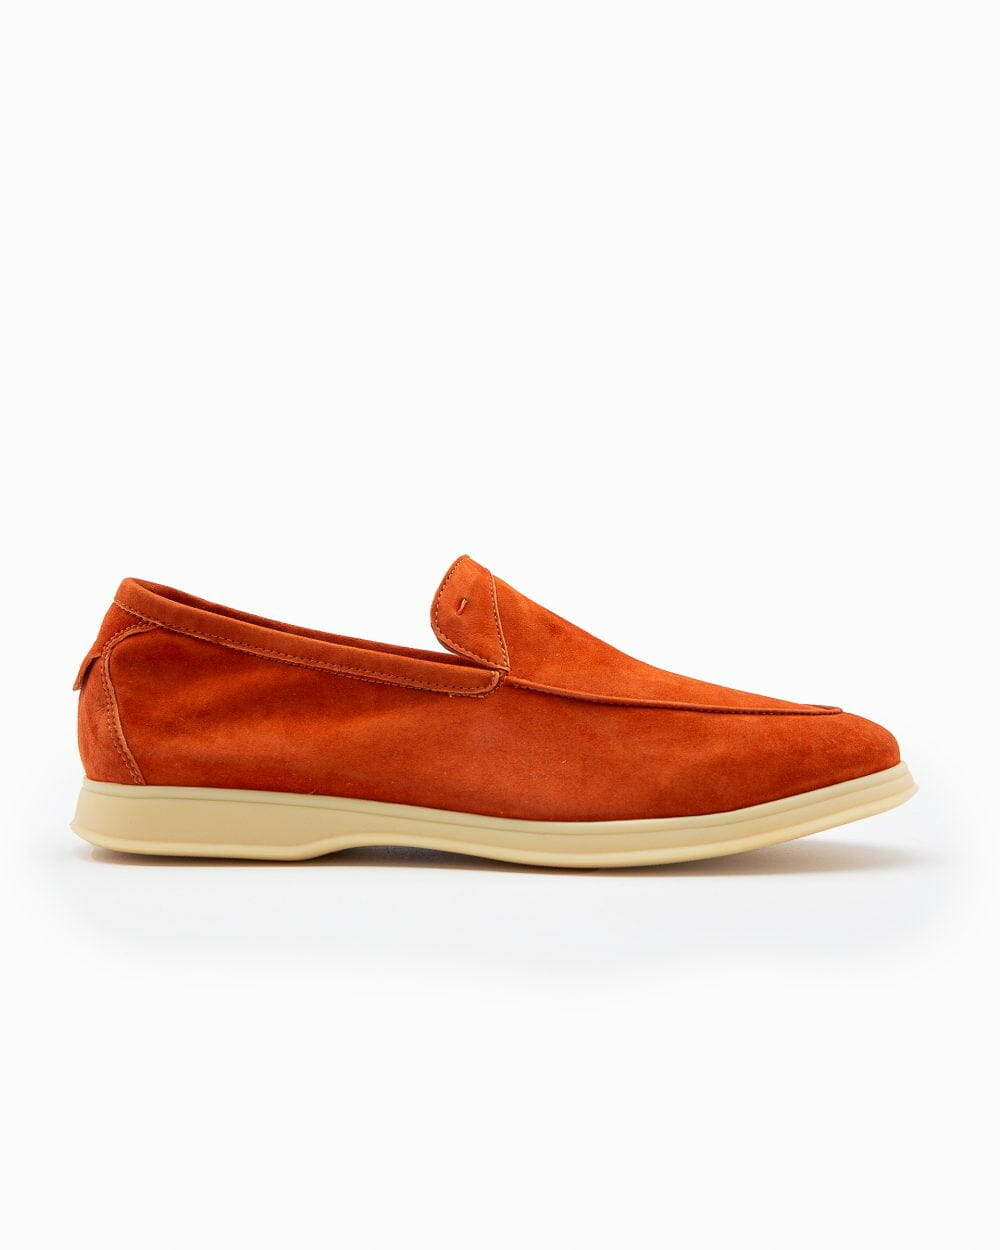 Aq-BEACH-LS-suede-sauvage-long-side